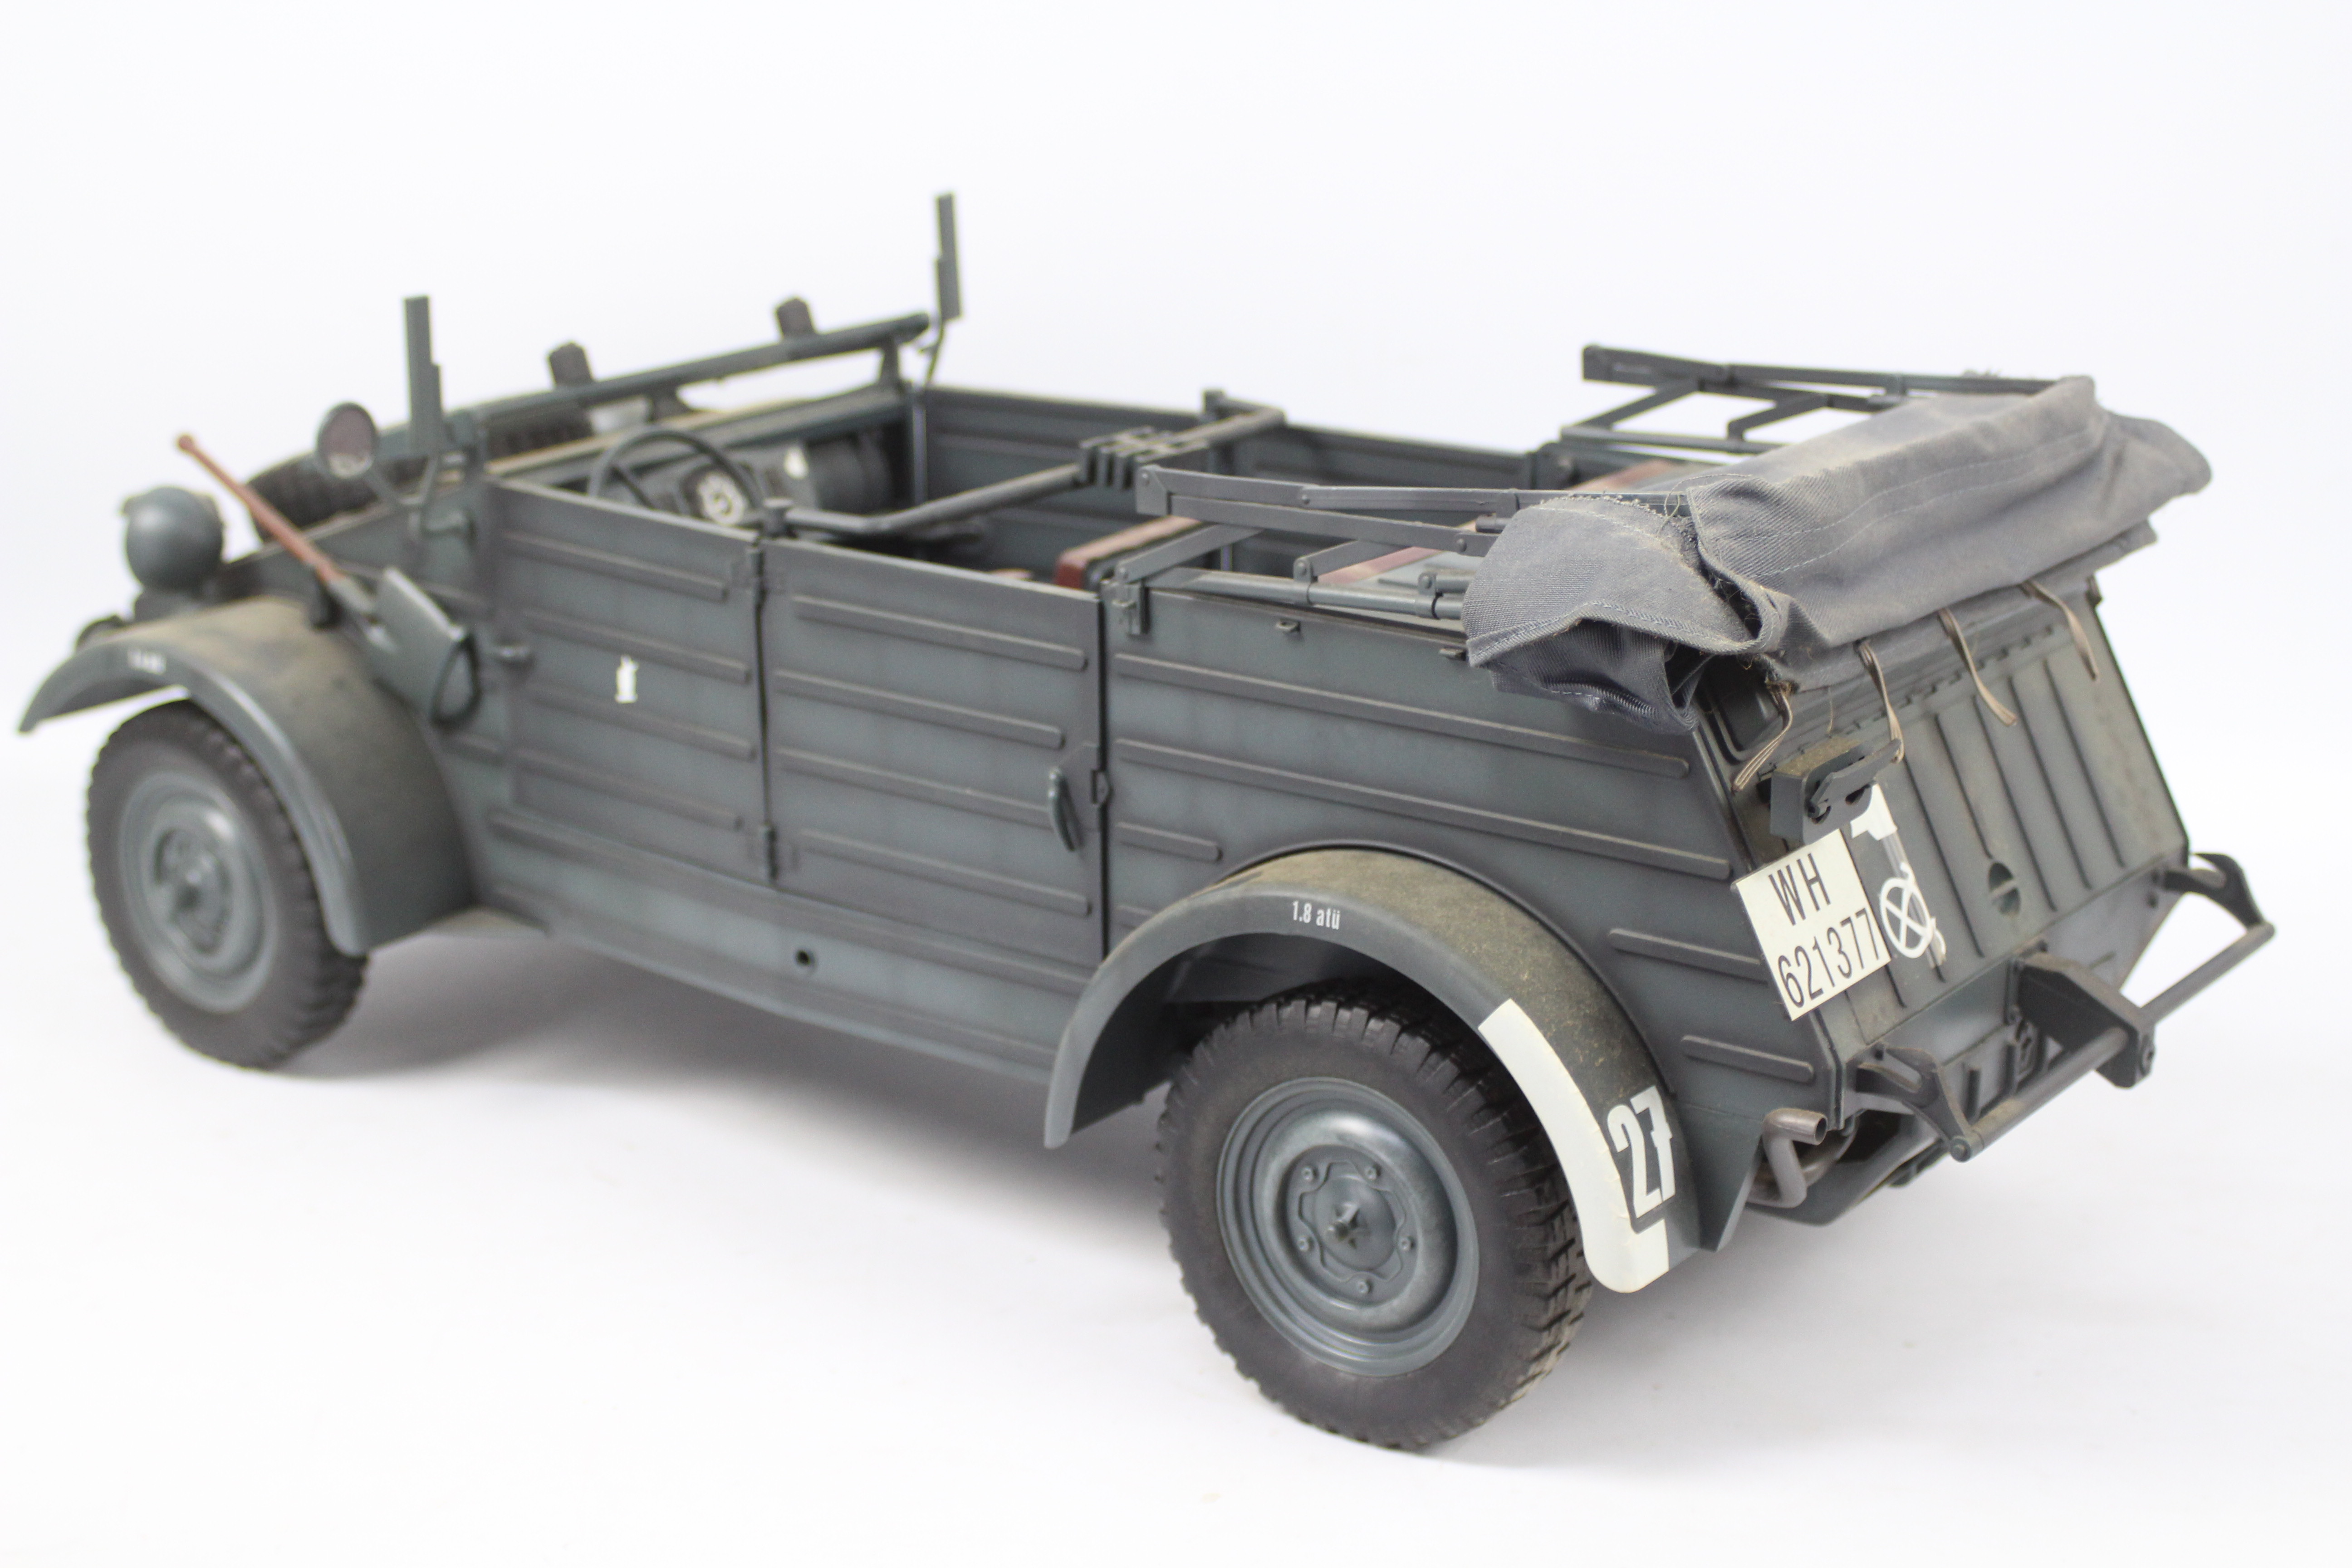 Dragon - A boxed Dragon #710150 WWII German Forces 1:6 scale Kubelwagen Type 82. - Image 6 of 10